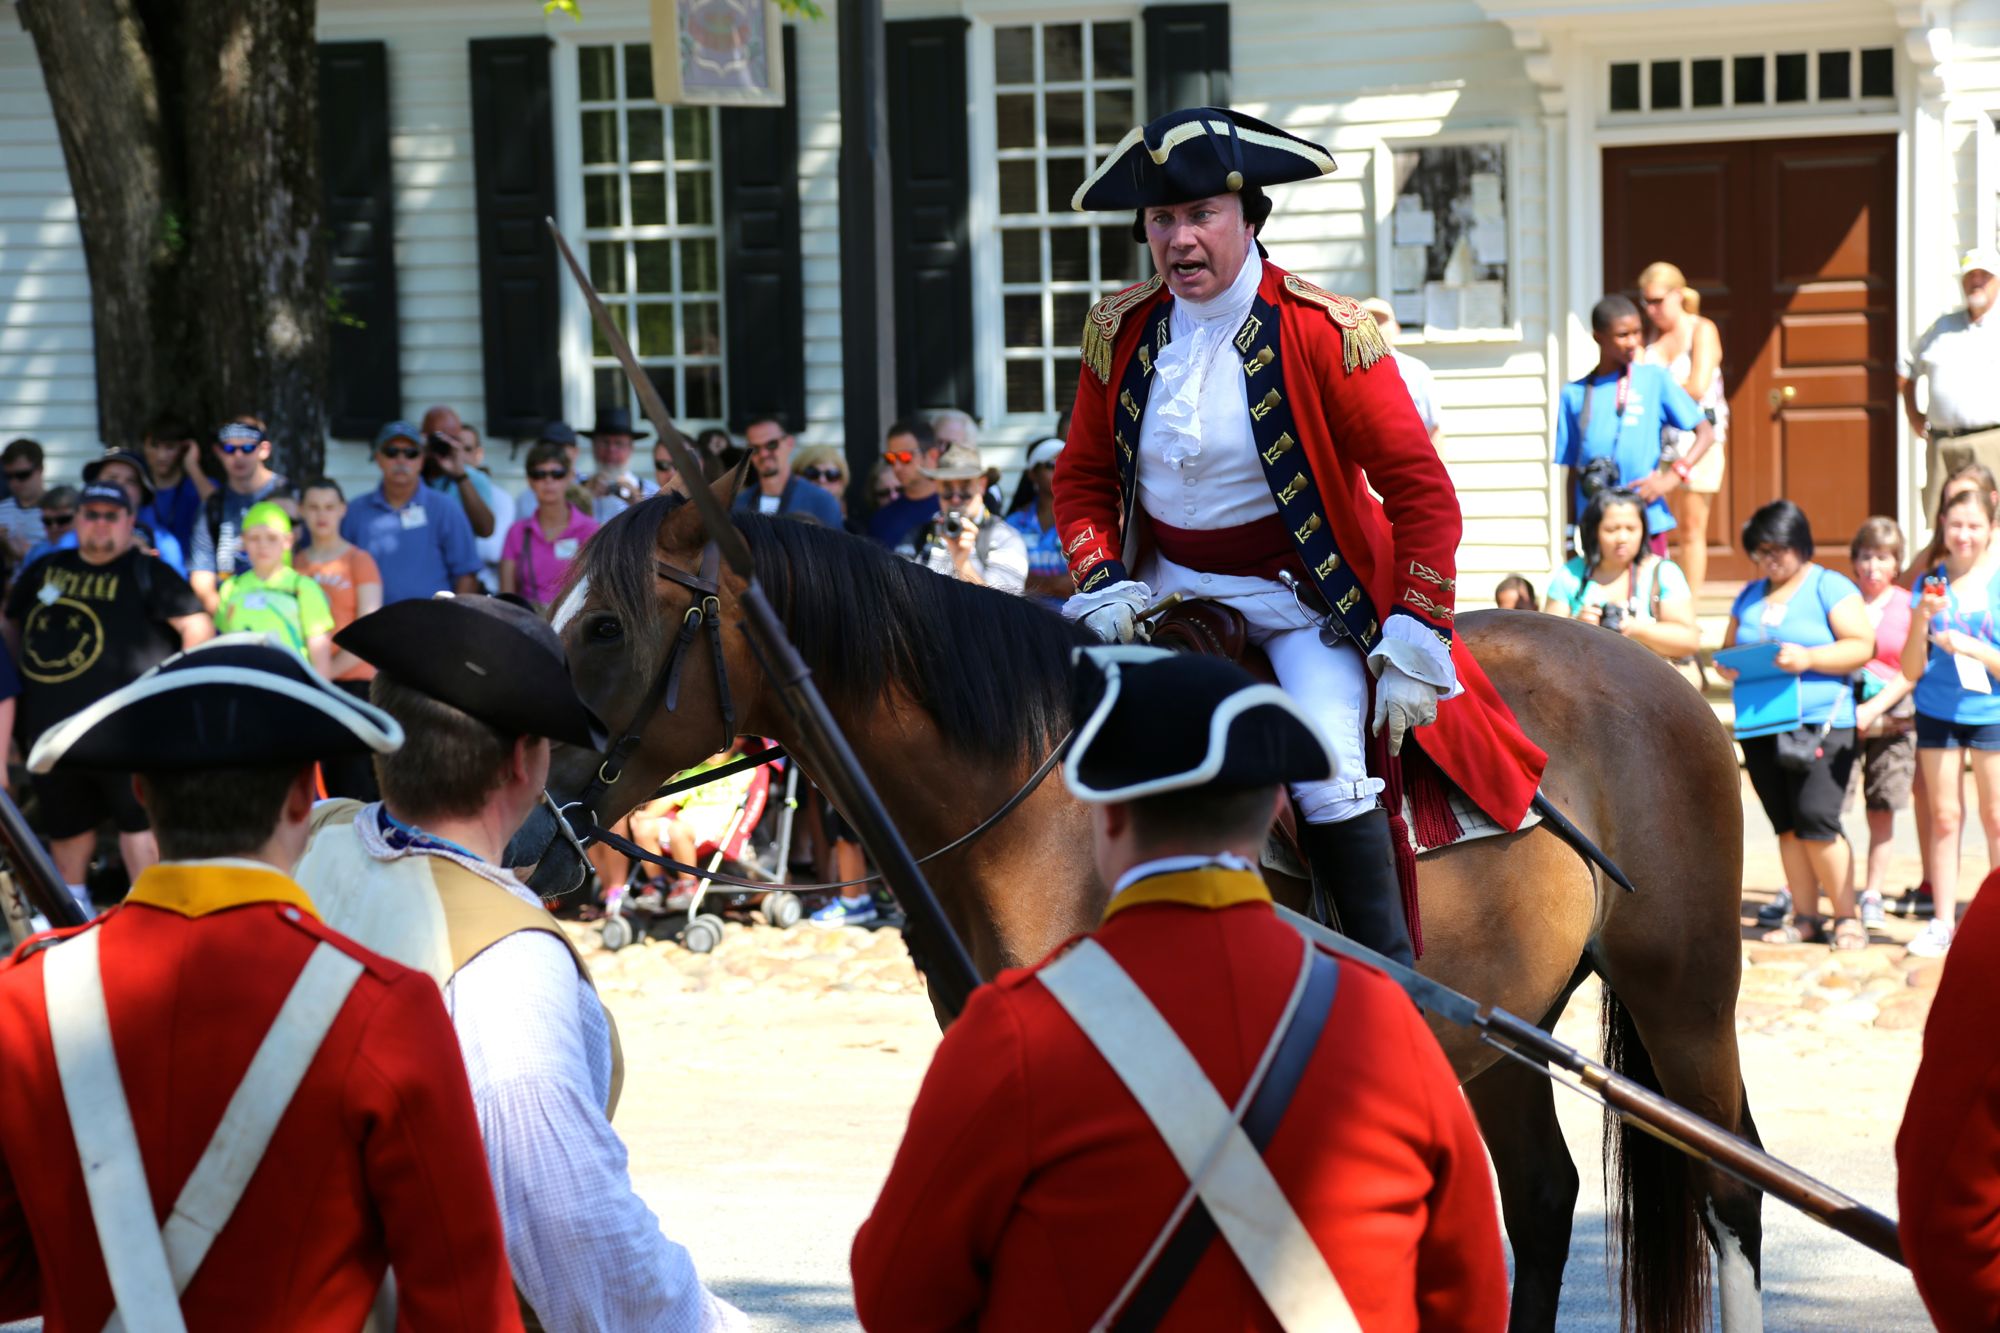 Colonial minute man army leader giving speech to recruits at Williamsburg